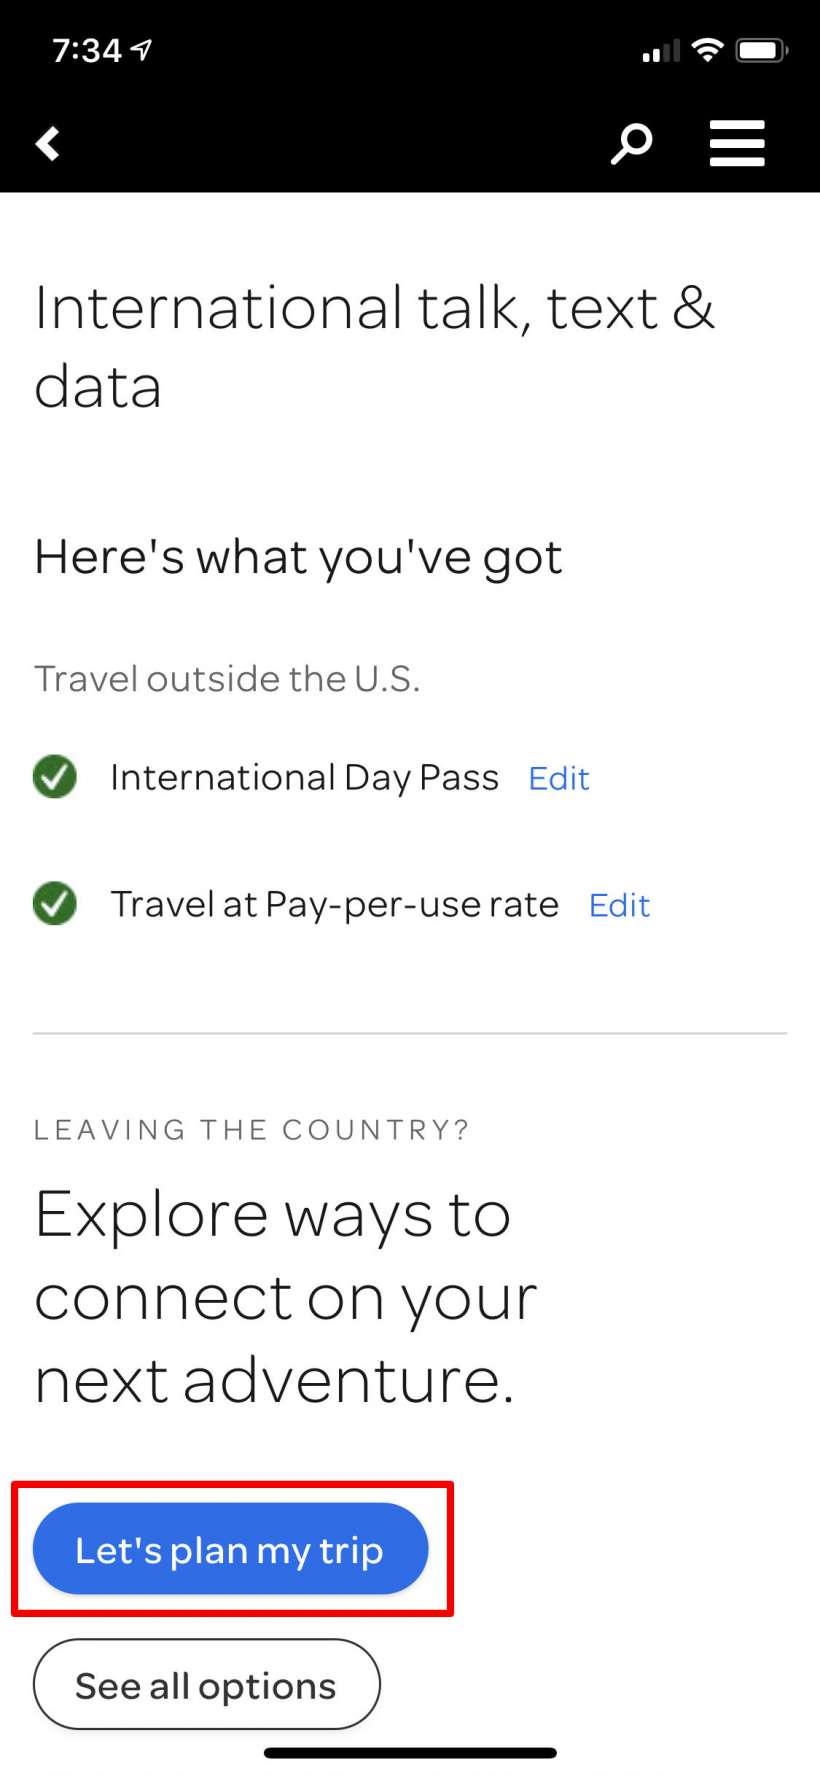 How to activate AT&T Passport for international travel on iPhone.